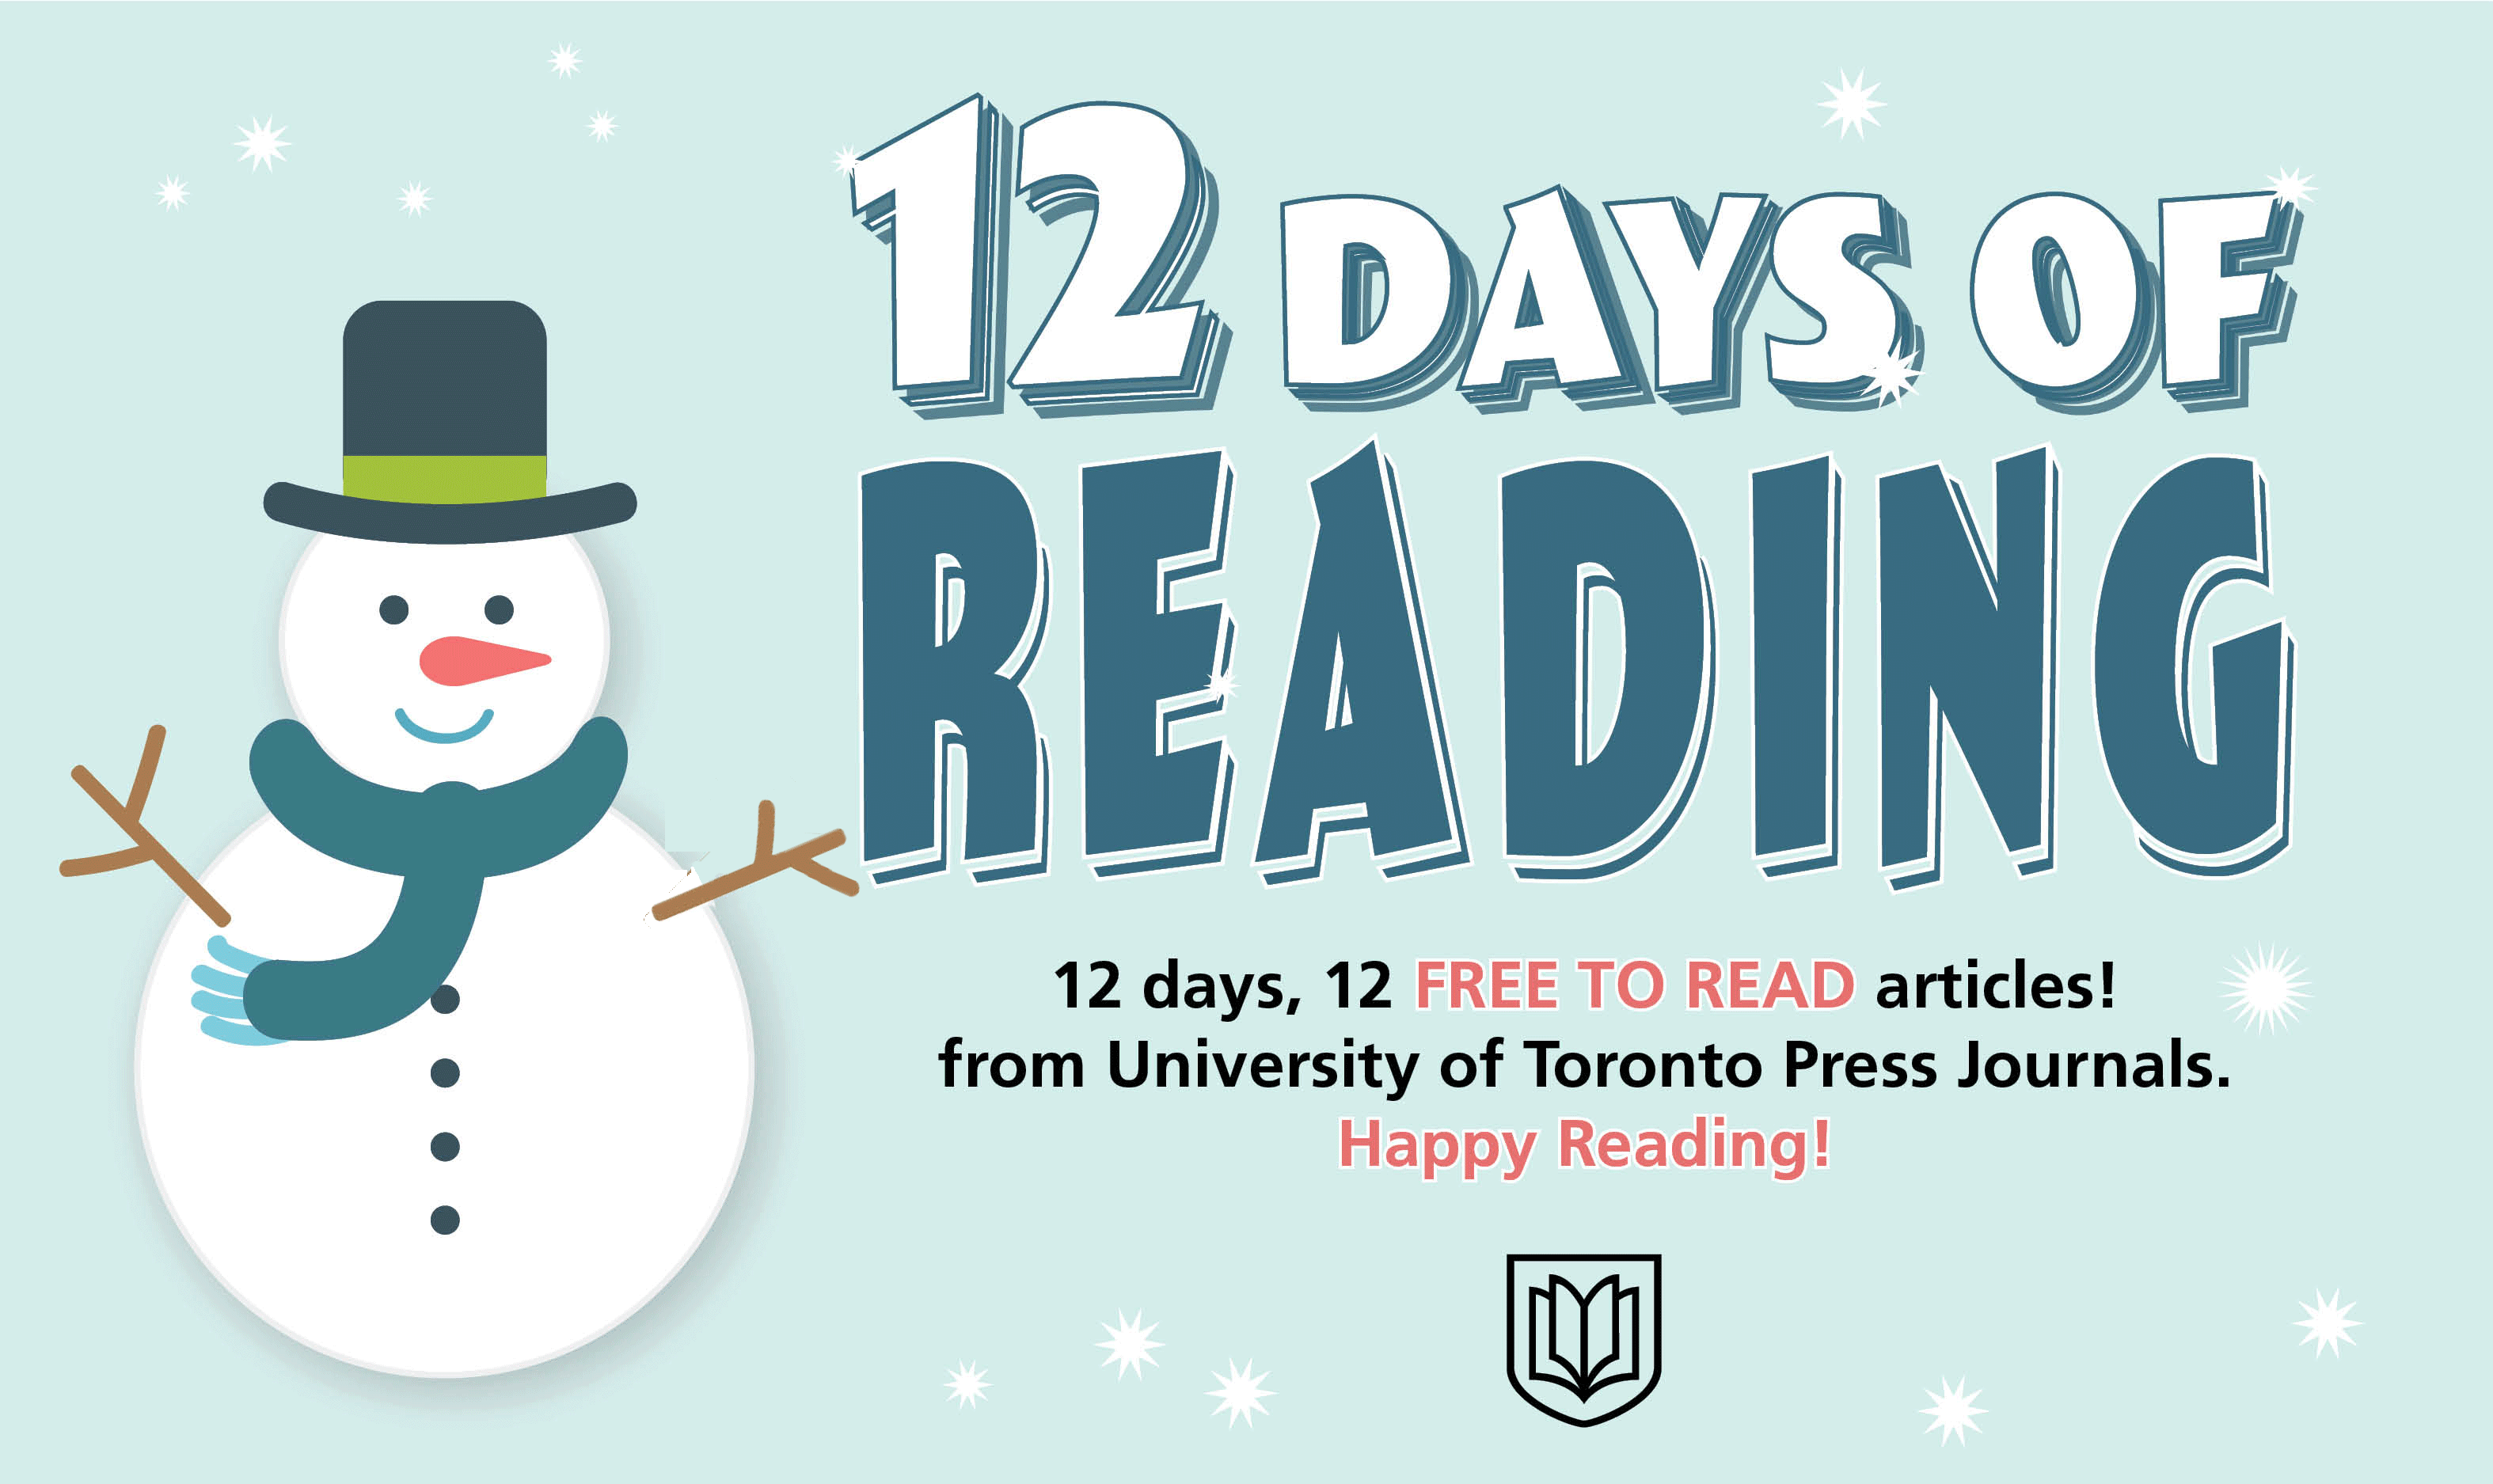 12 Days of Reading